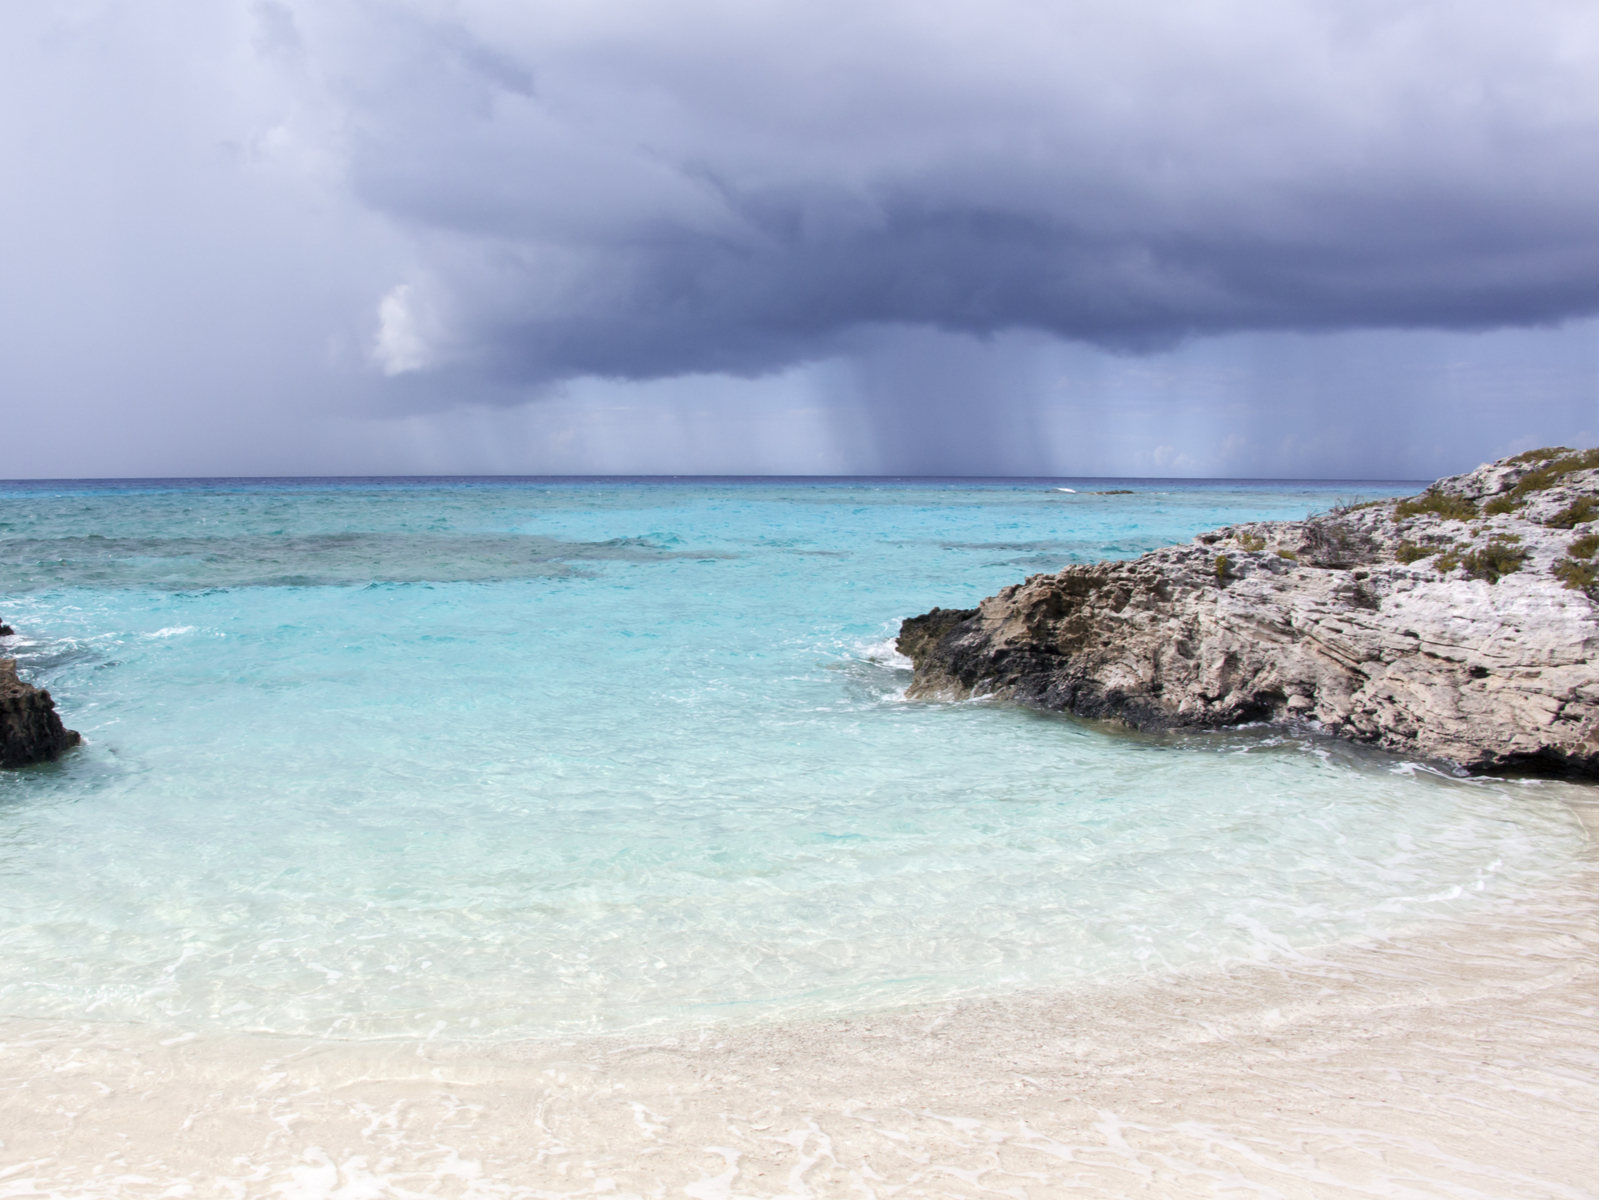 Heavy rain pictured during the worst time to visit the Bahamas